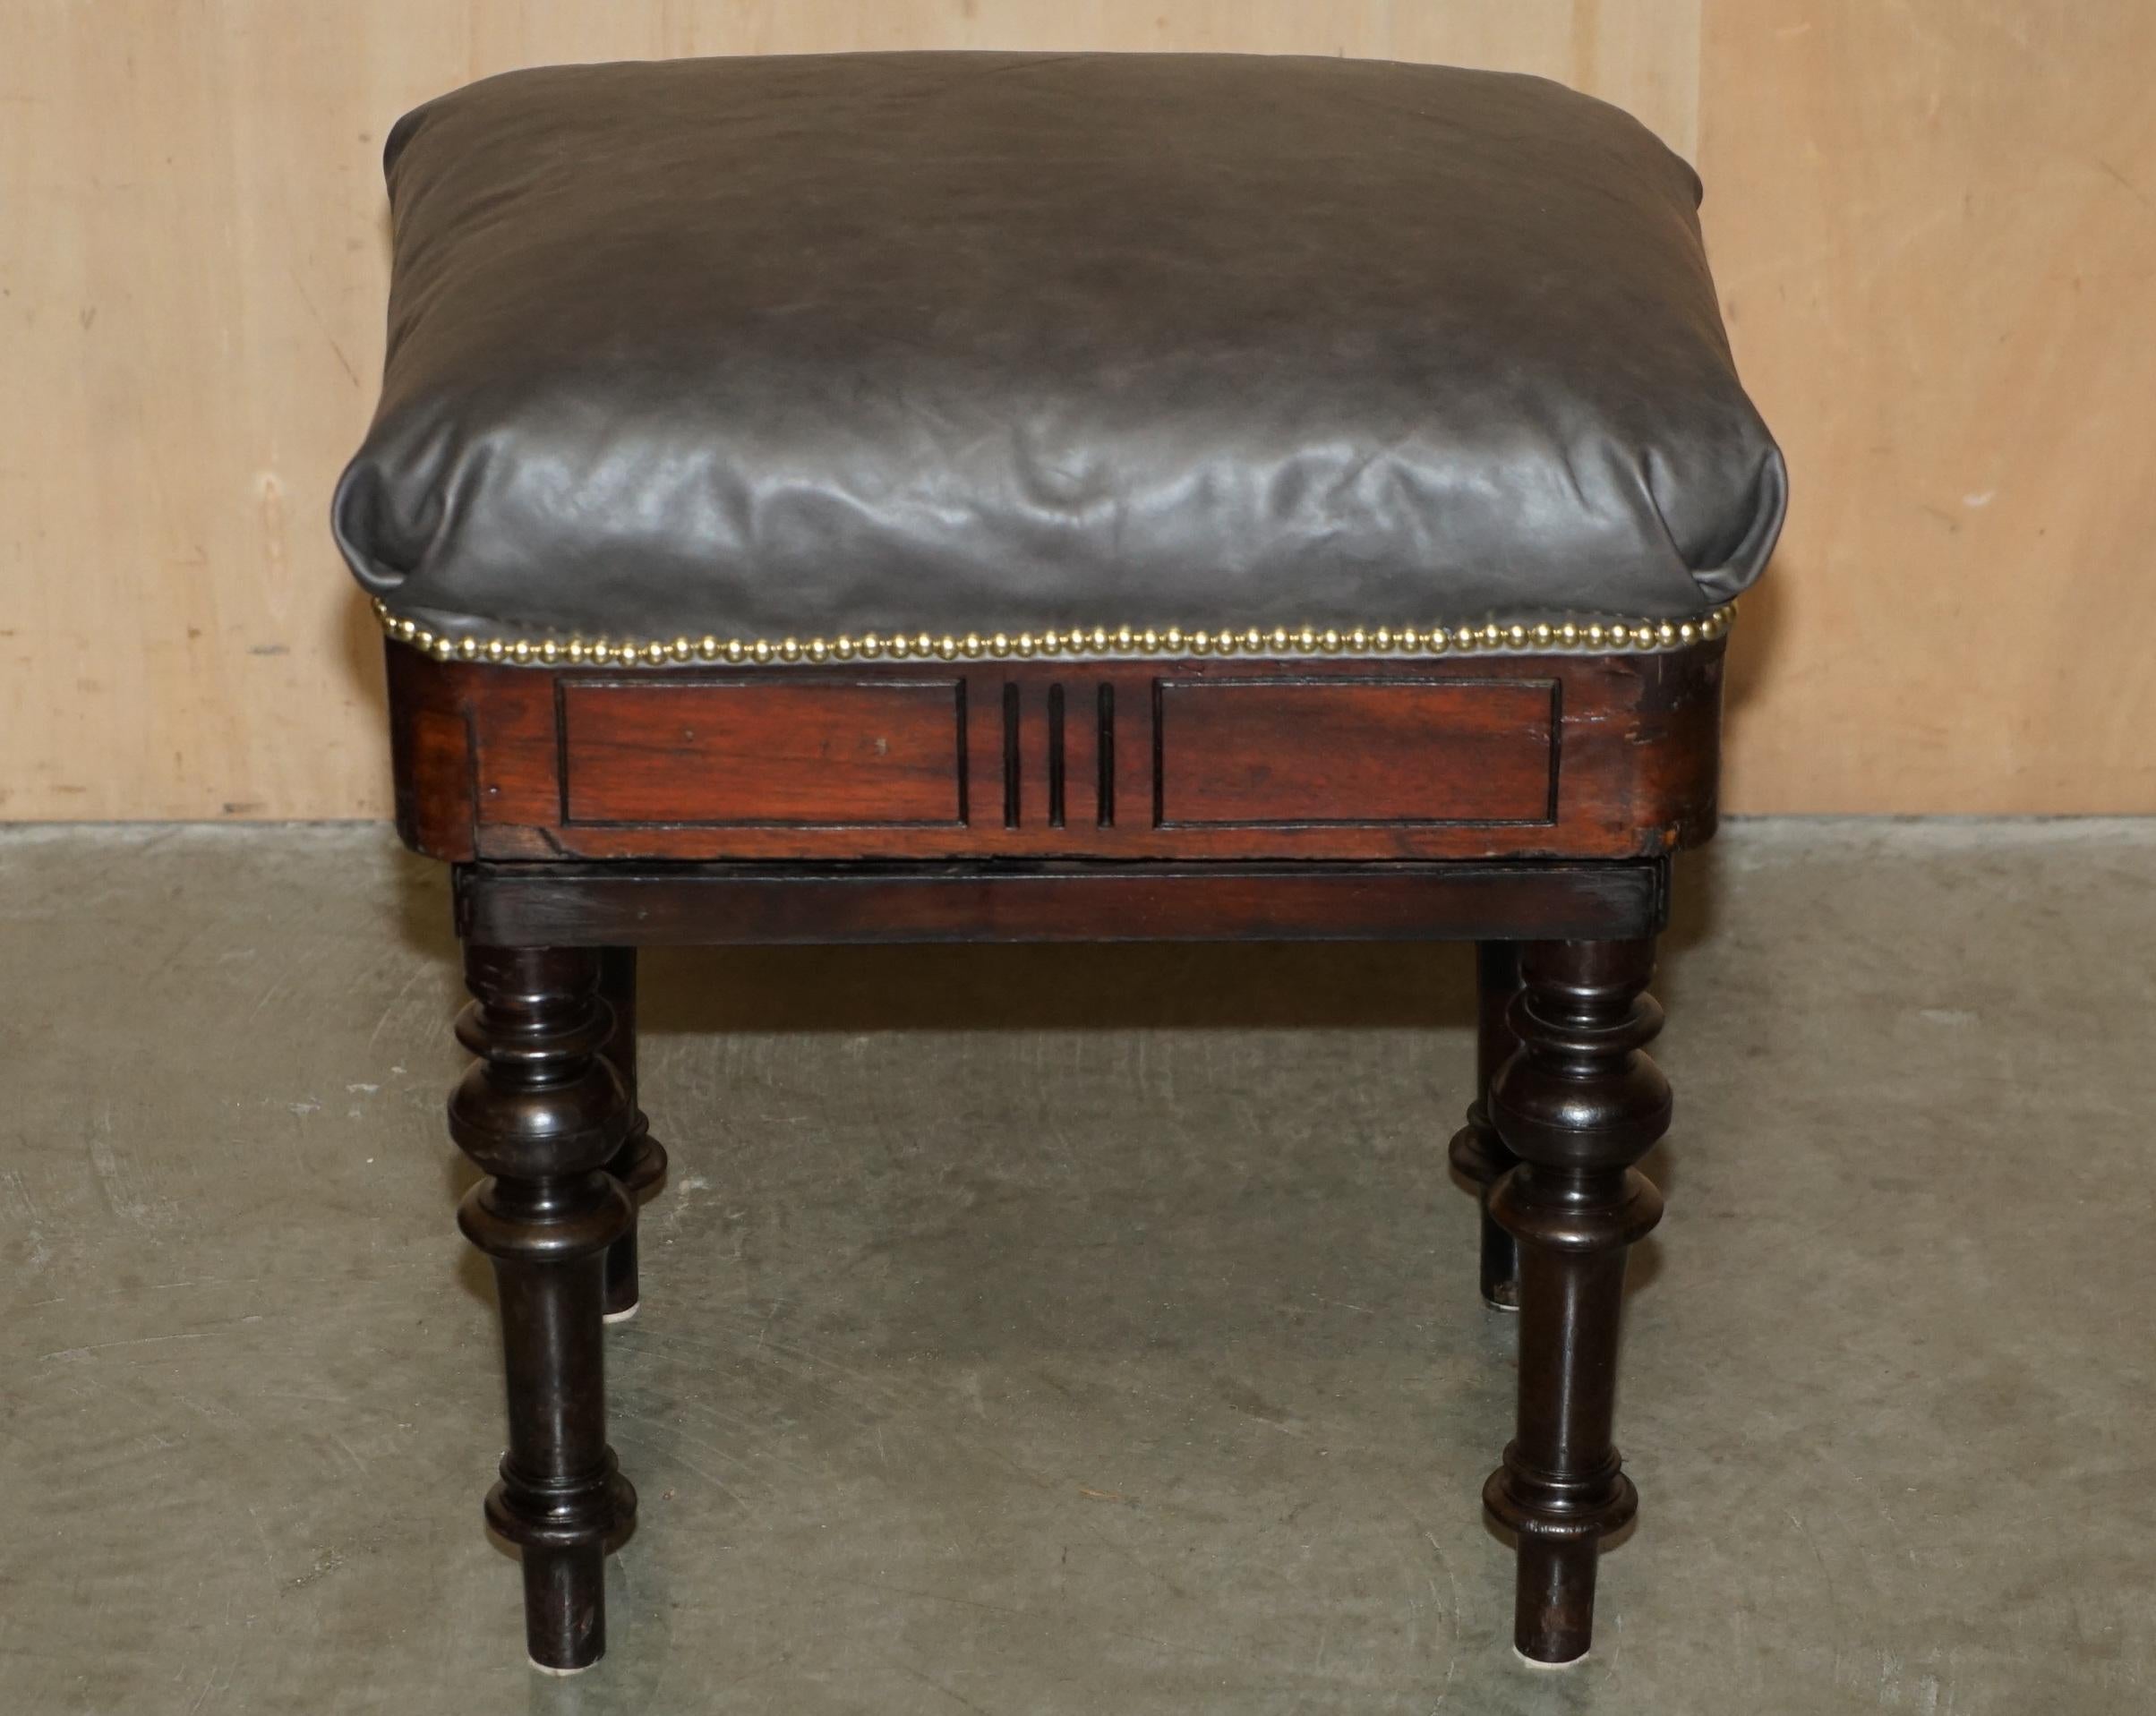 Royal House Antiques

Royal House Antiques is delighted to offer for sale this lovely collectable original Victorian Brooks Piano stool made in the Campaign style with removable legs and new grey heritage leather top

A very good looking collectable